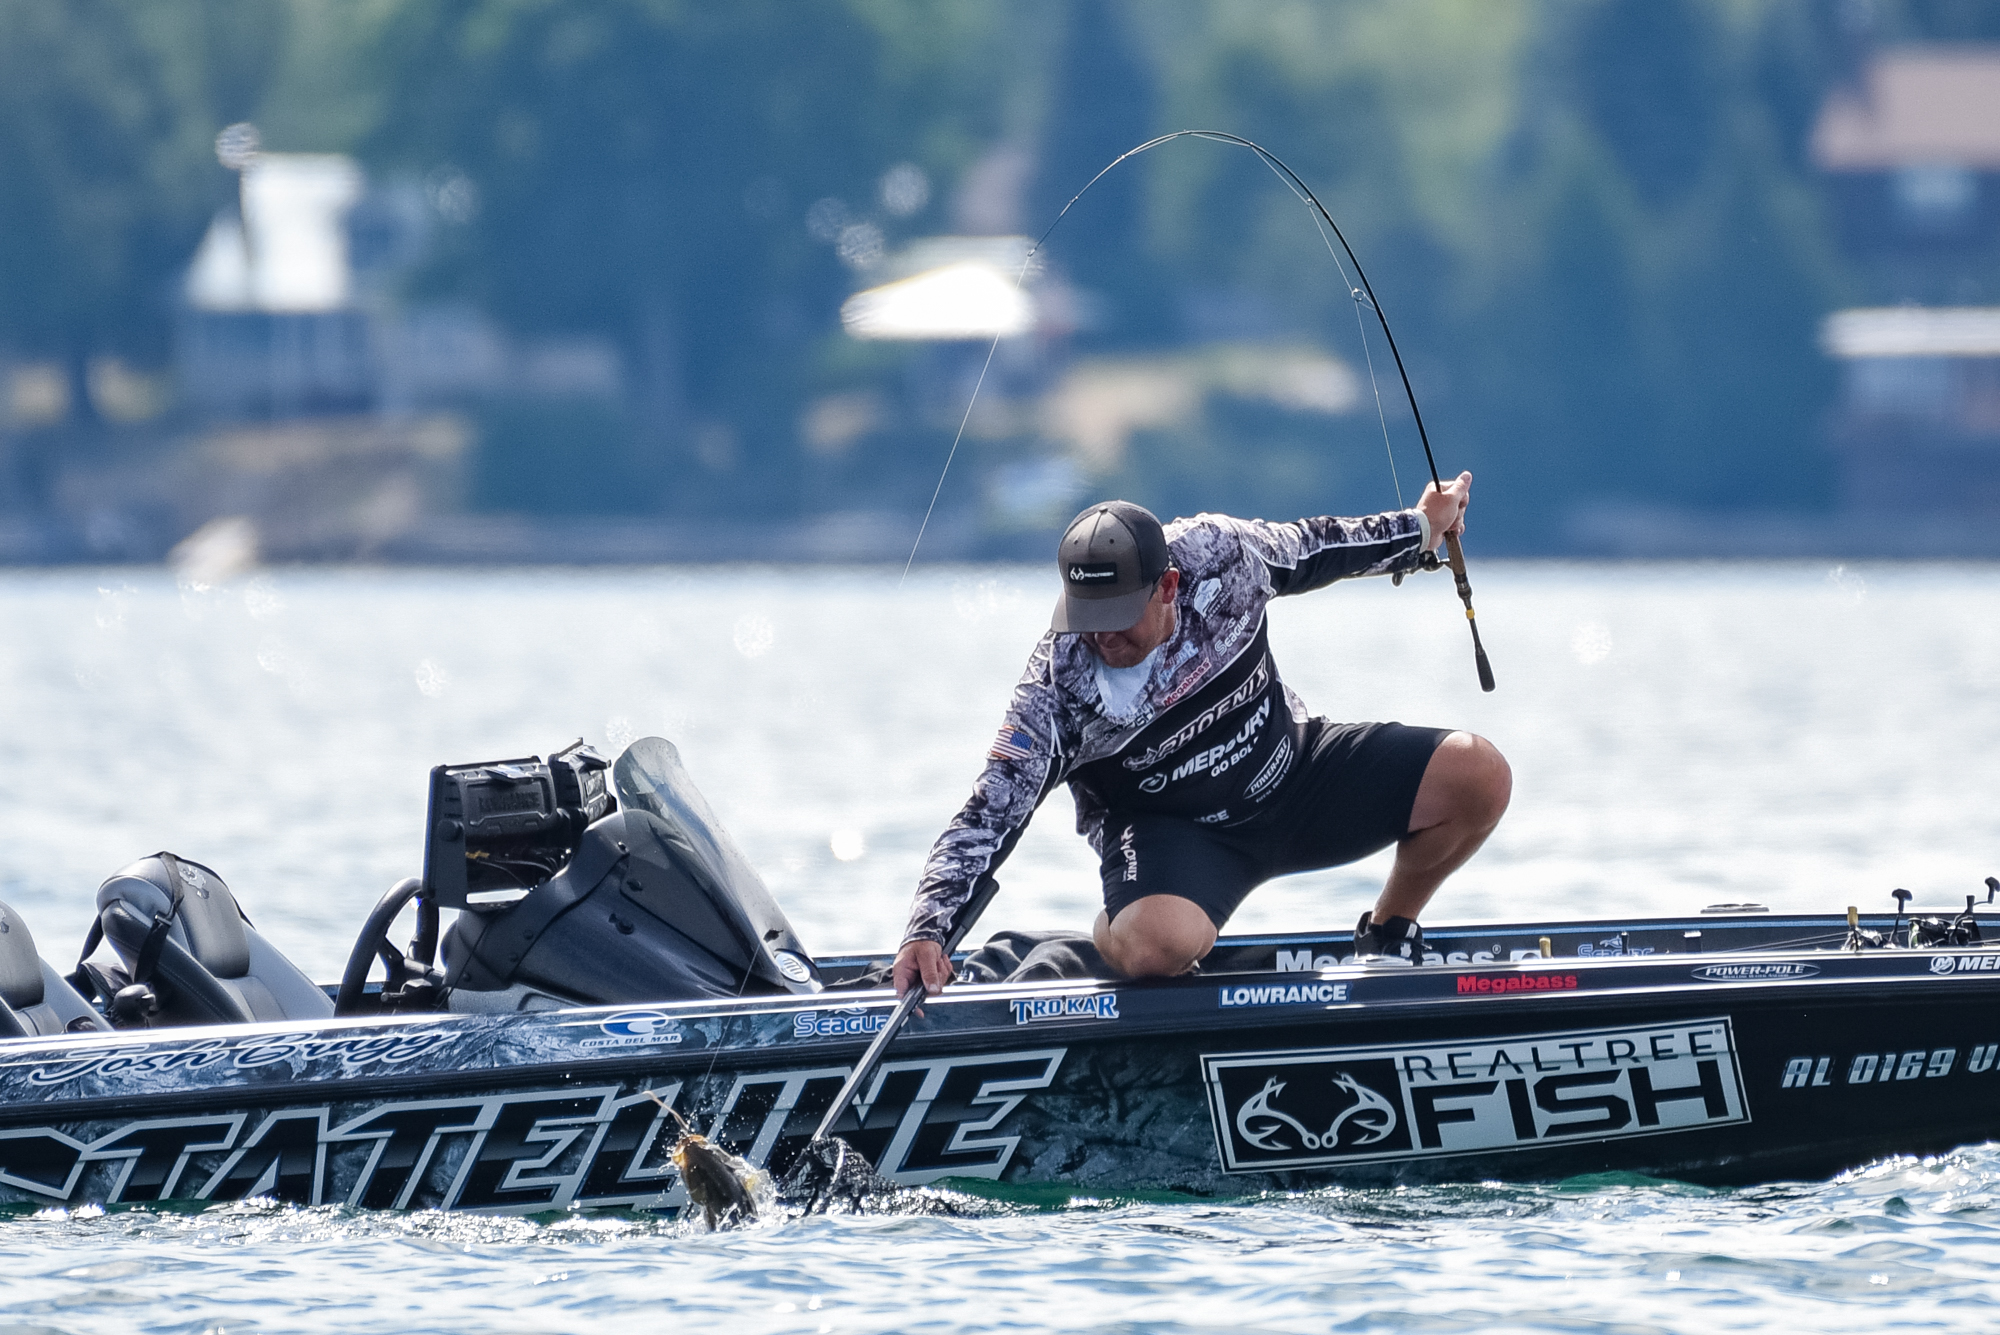 Old Boards, New Twists - Major League Fishing